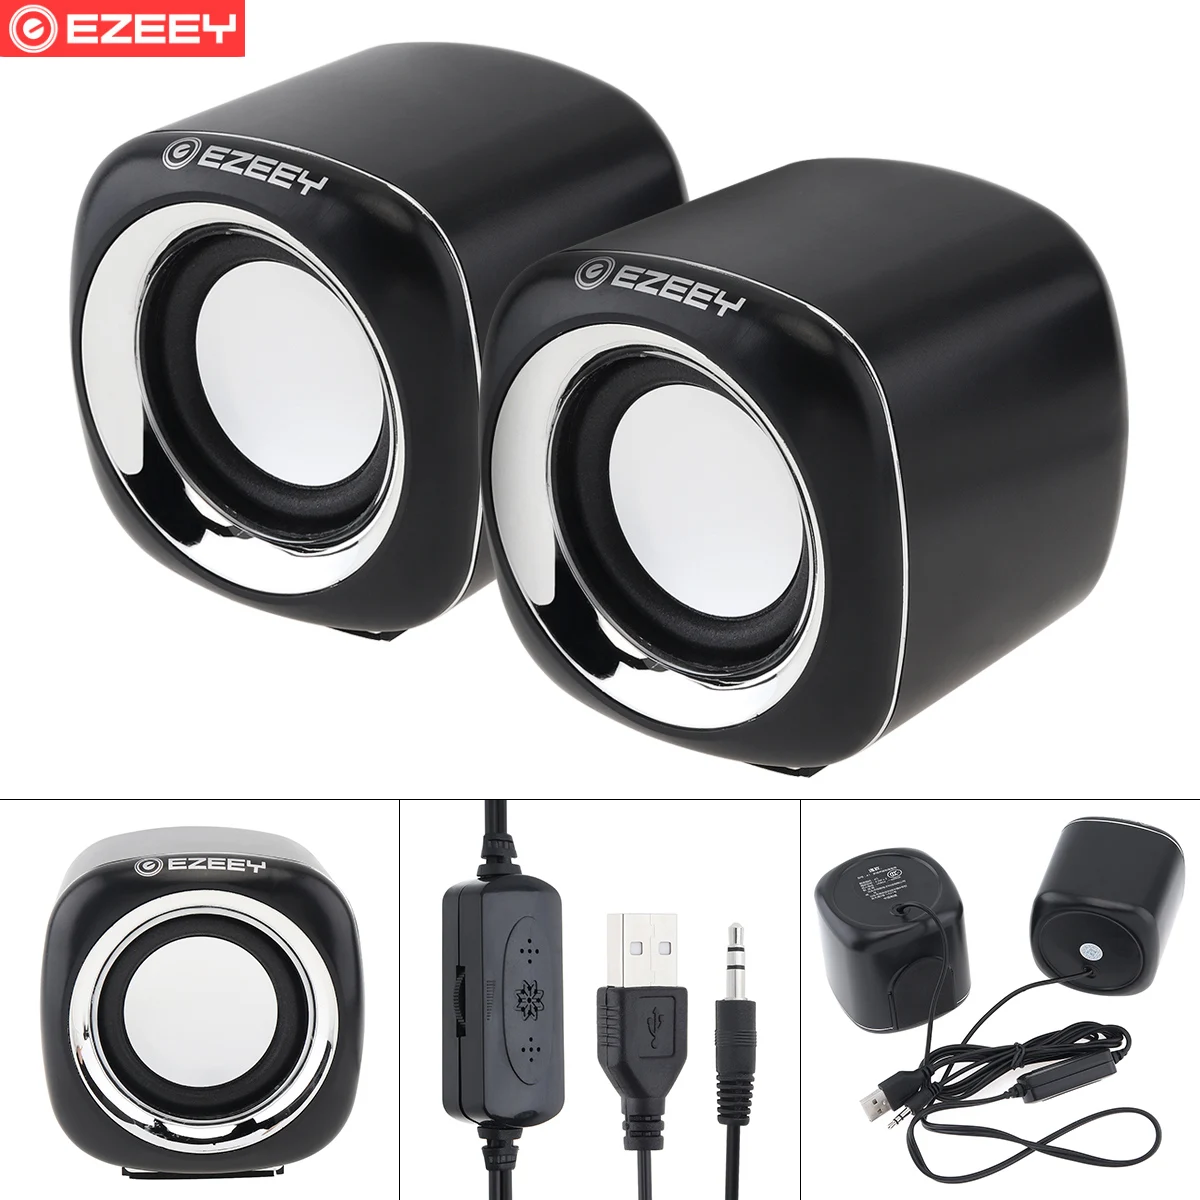 

3W Mini USB 2.0 Subwoofer Speakers with 3.5mm Stereo Jack and USB Powered Support Volume Control for PC / Laptop / Smartphone